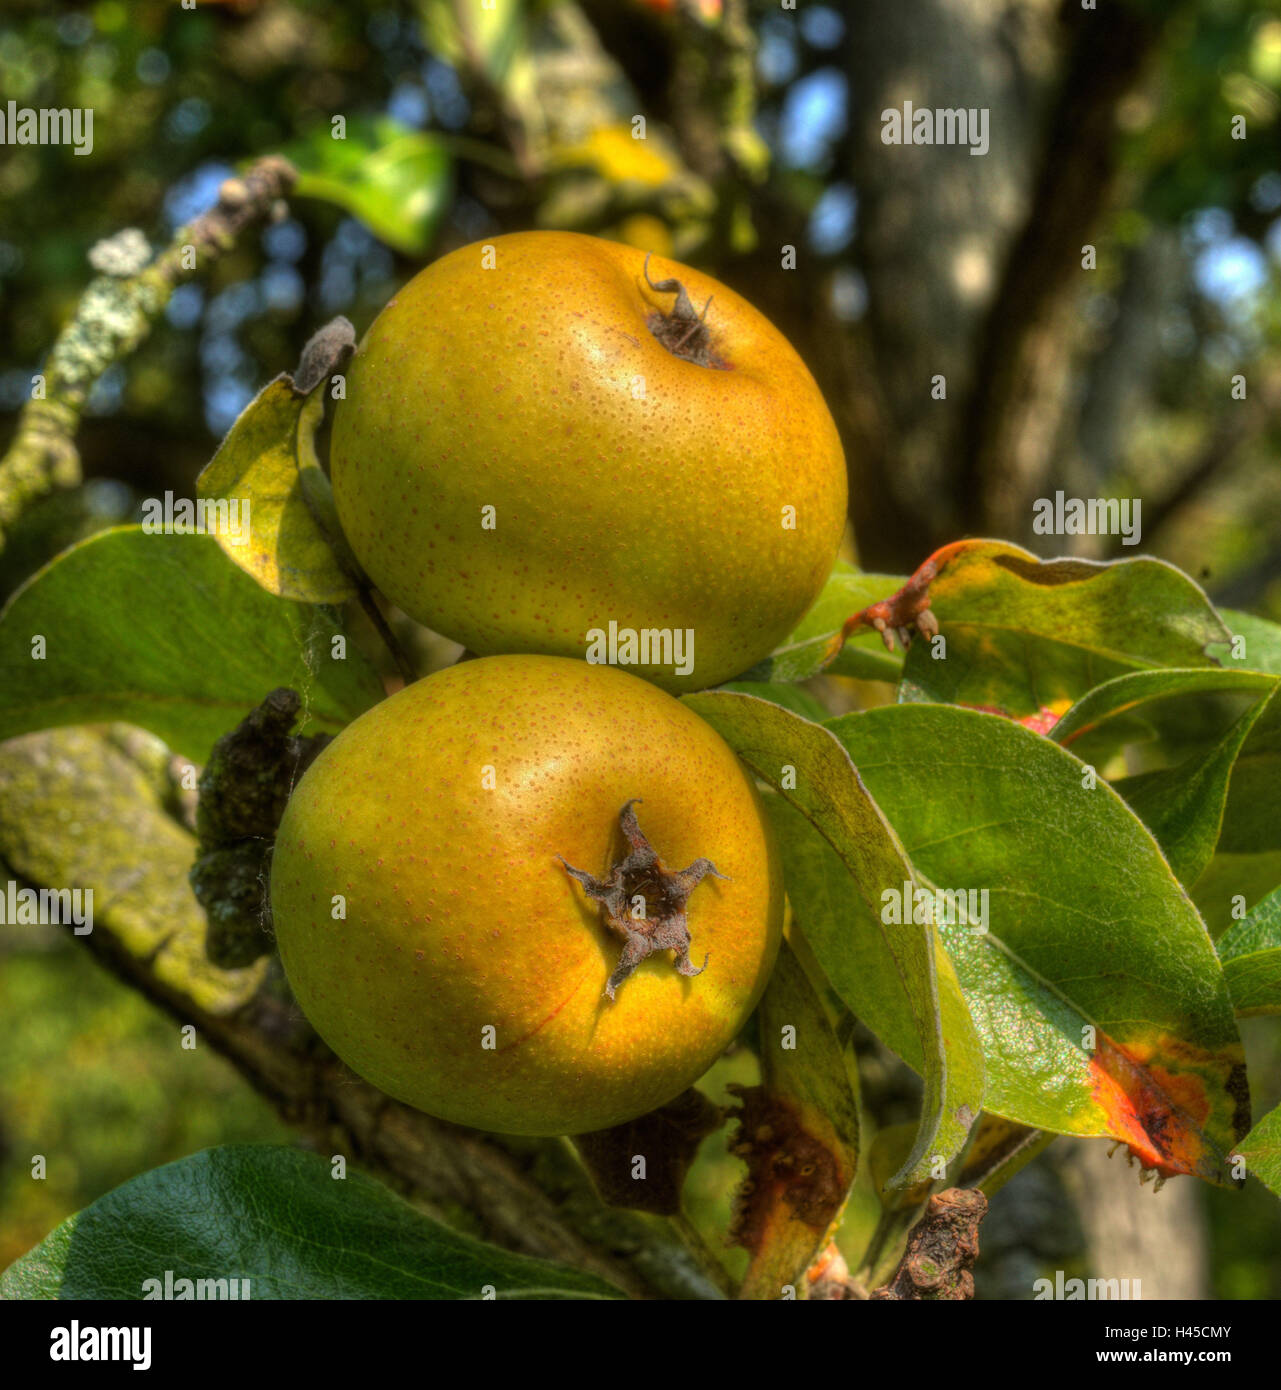 Pear tree, detail, branch, fruits, snow pears, pear tree, tree, pears, leather ball pears, fruit, pear fruits, Stock Photo